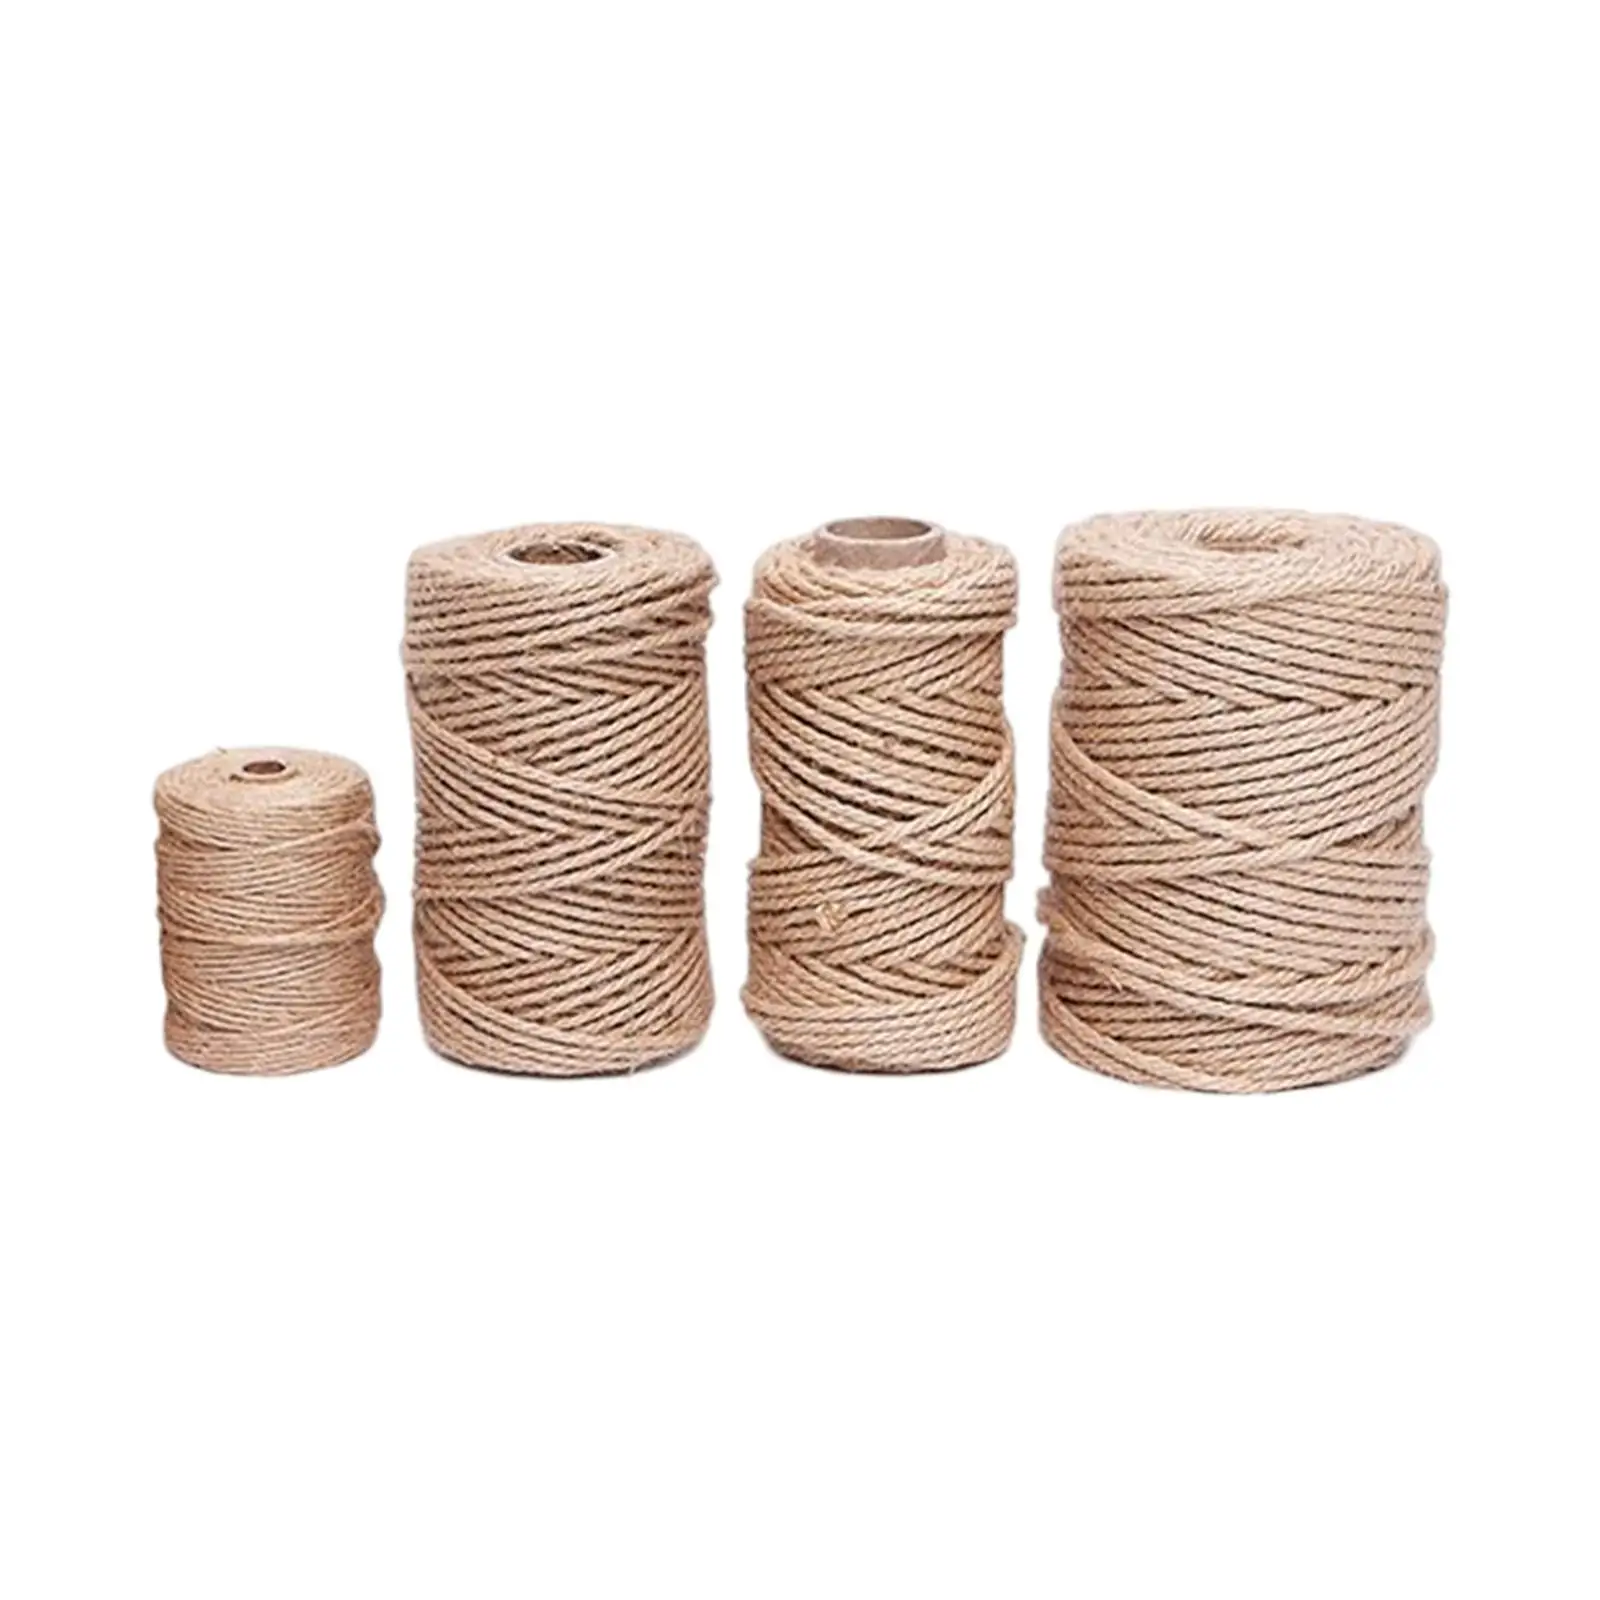 Jute Twine Rope Durable Sisal Rope for Cat Scratching Post Home Decoration Cat Scratch Boards Accessories Gift Packing Wedding